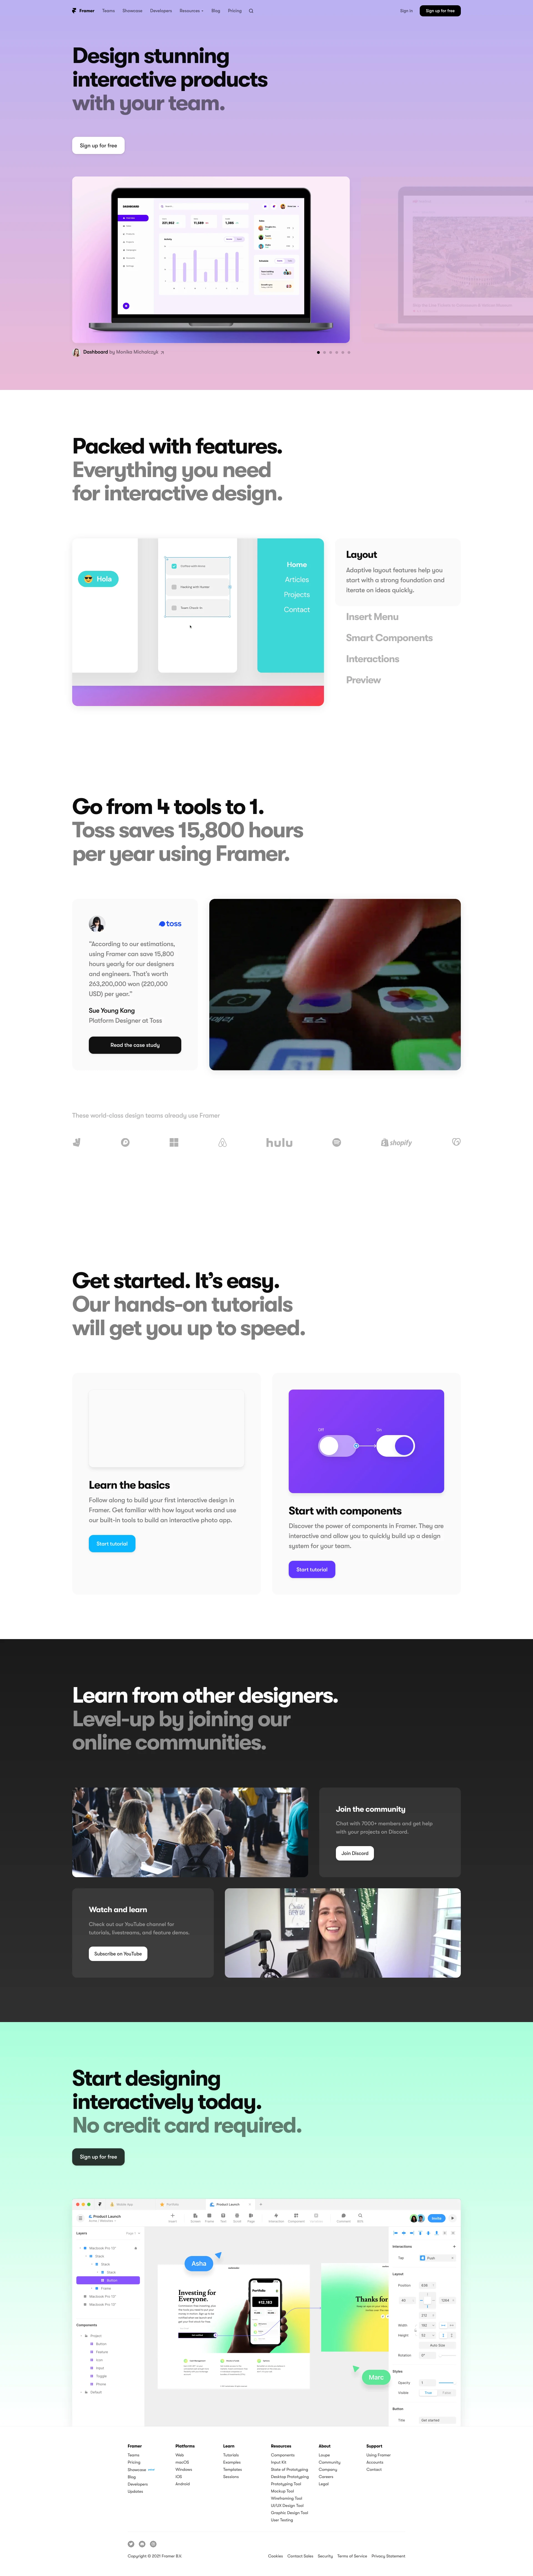 Framer Landing Page Example: It’s interactive design made simple—no code required, browser-based, and free for everyone.